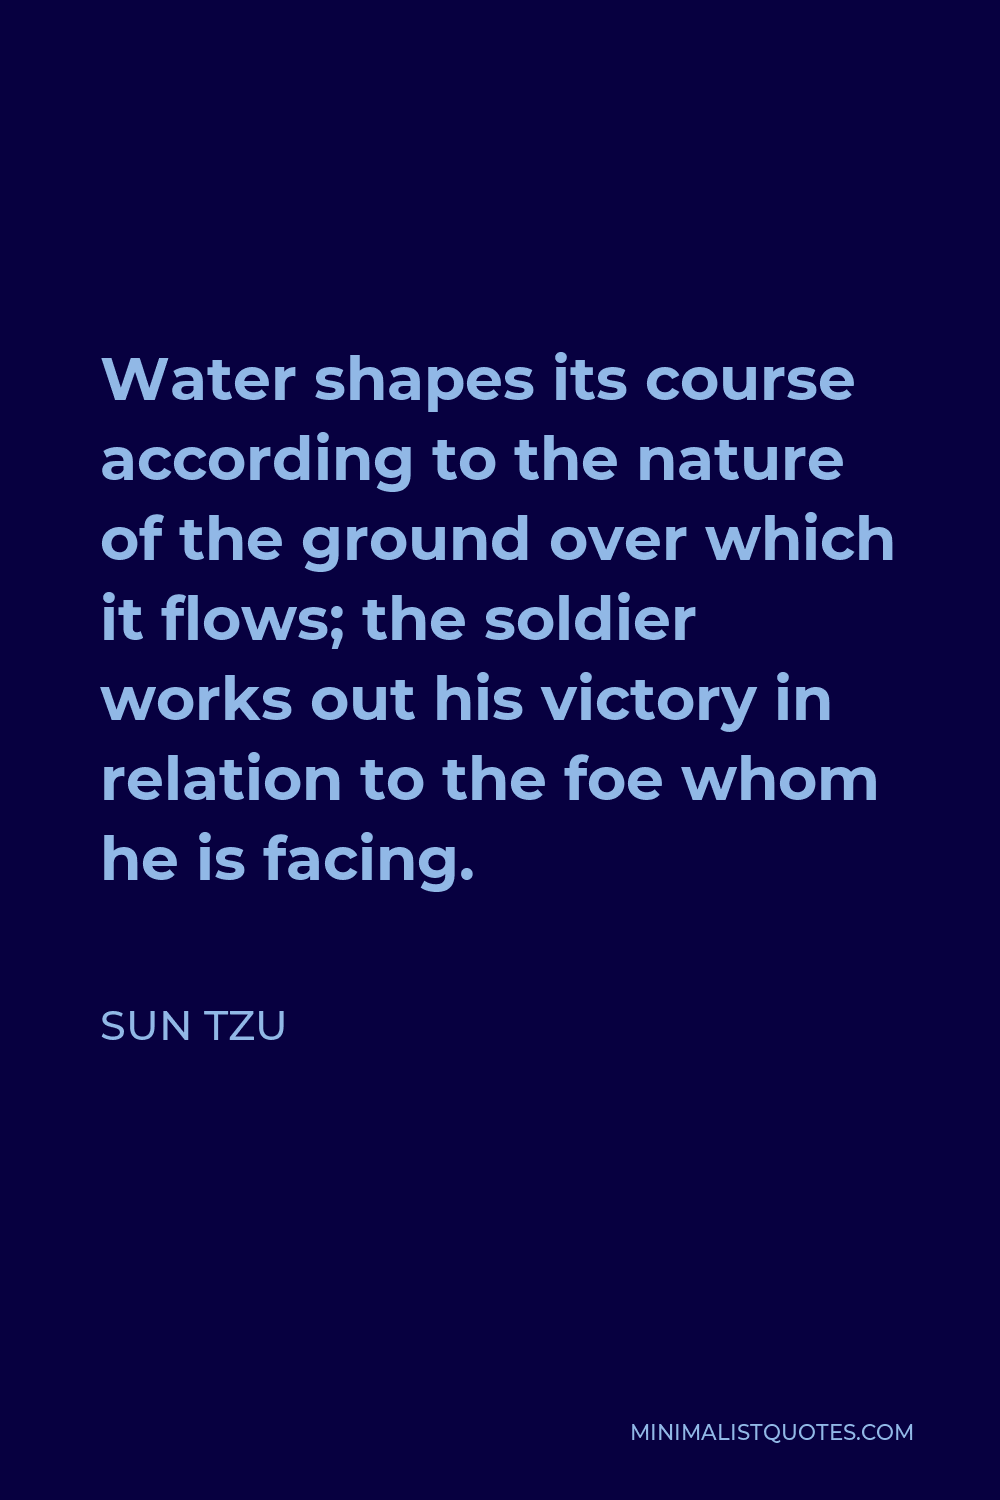 Sun Tzu Quote - Water shapes its course according to the nature of the ground over which it flows; the soldier works out his victory in relation to the foe whom he is facing.